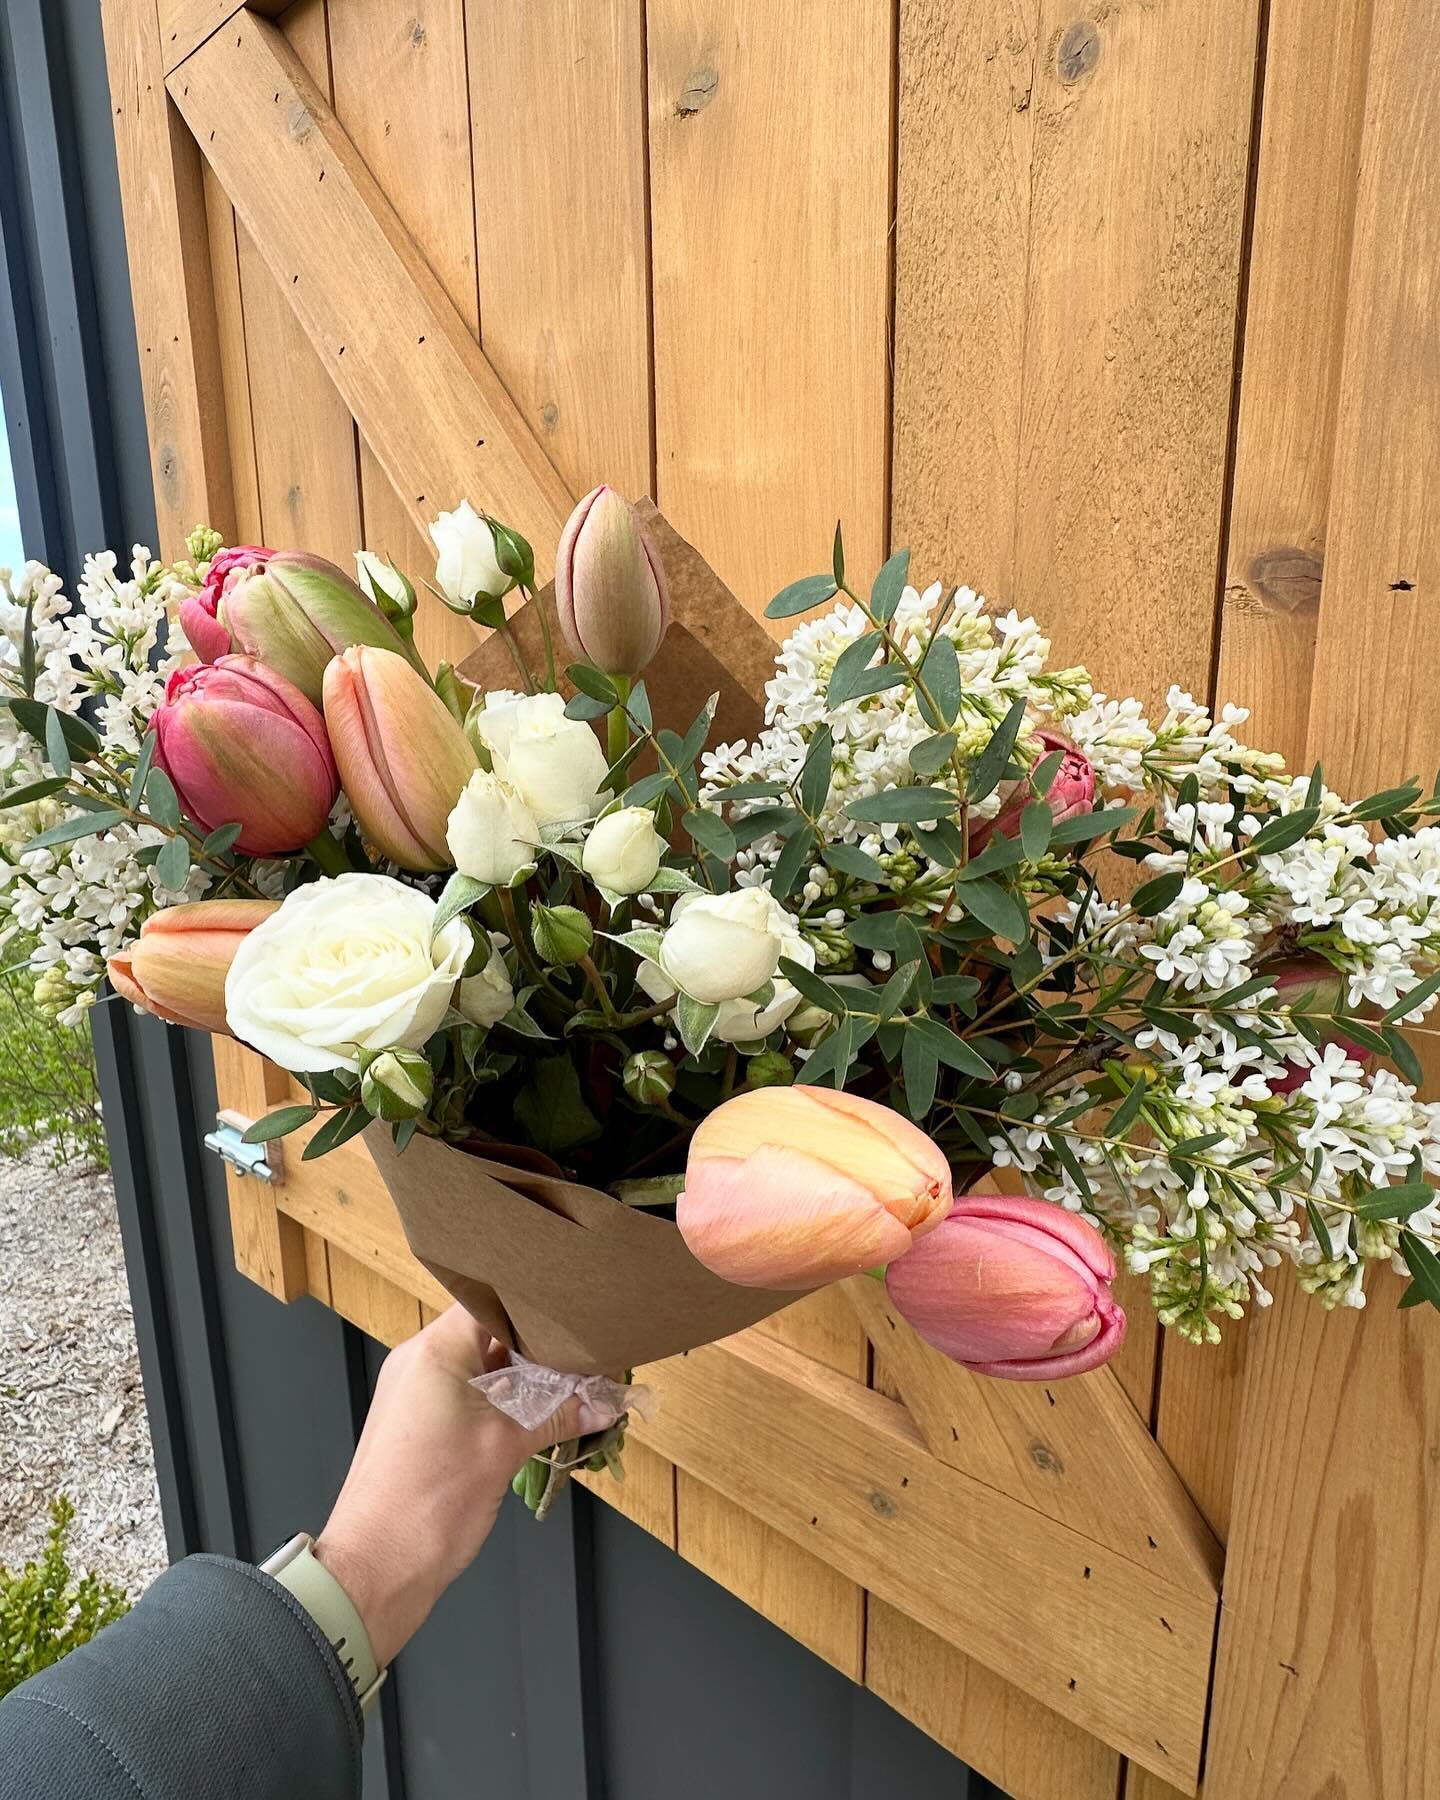 Mother&rsquo;s Day. Friday and Sunday 8-8. Mixed Bouquets, Tulip Bouquets, Topiaries (that gardenia smells amazing when it blooms 😍), Dahlia Tubers, Vases, Cards, and more!  We cannot wait to spoil the mom in your life with gifts.